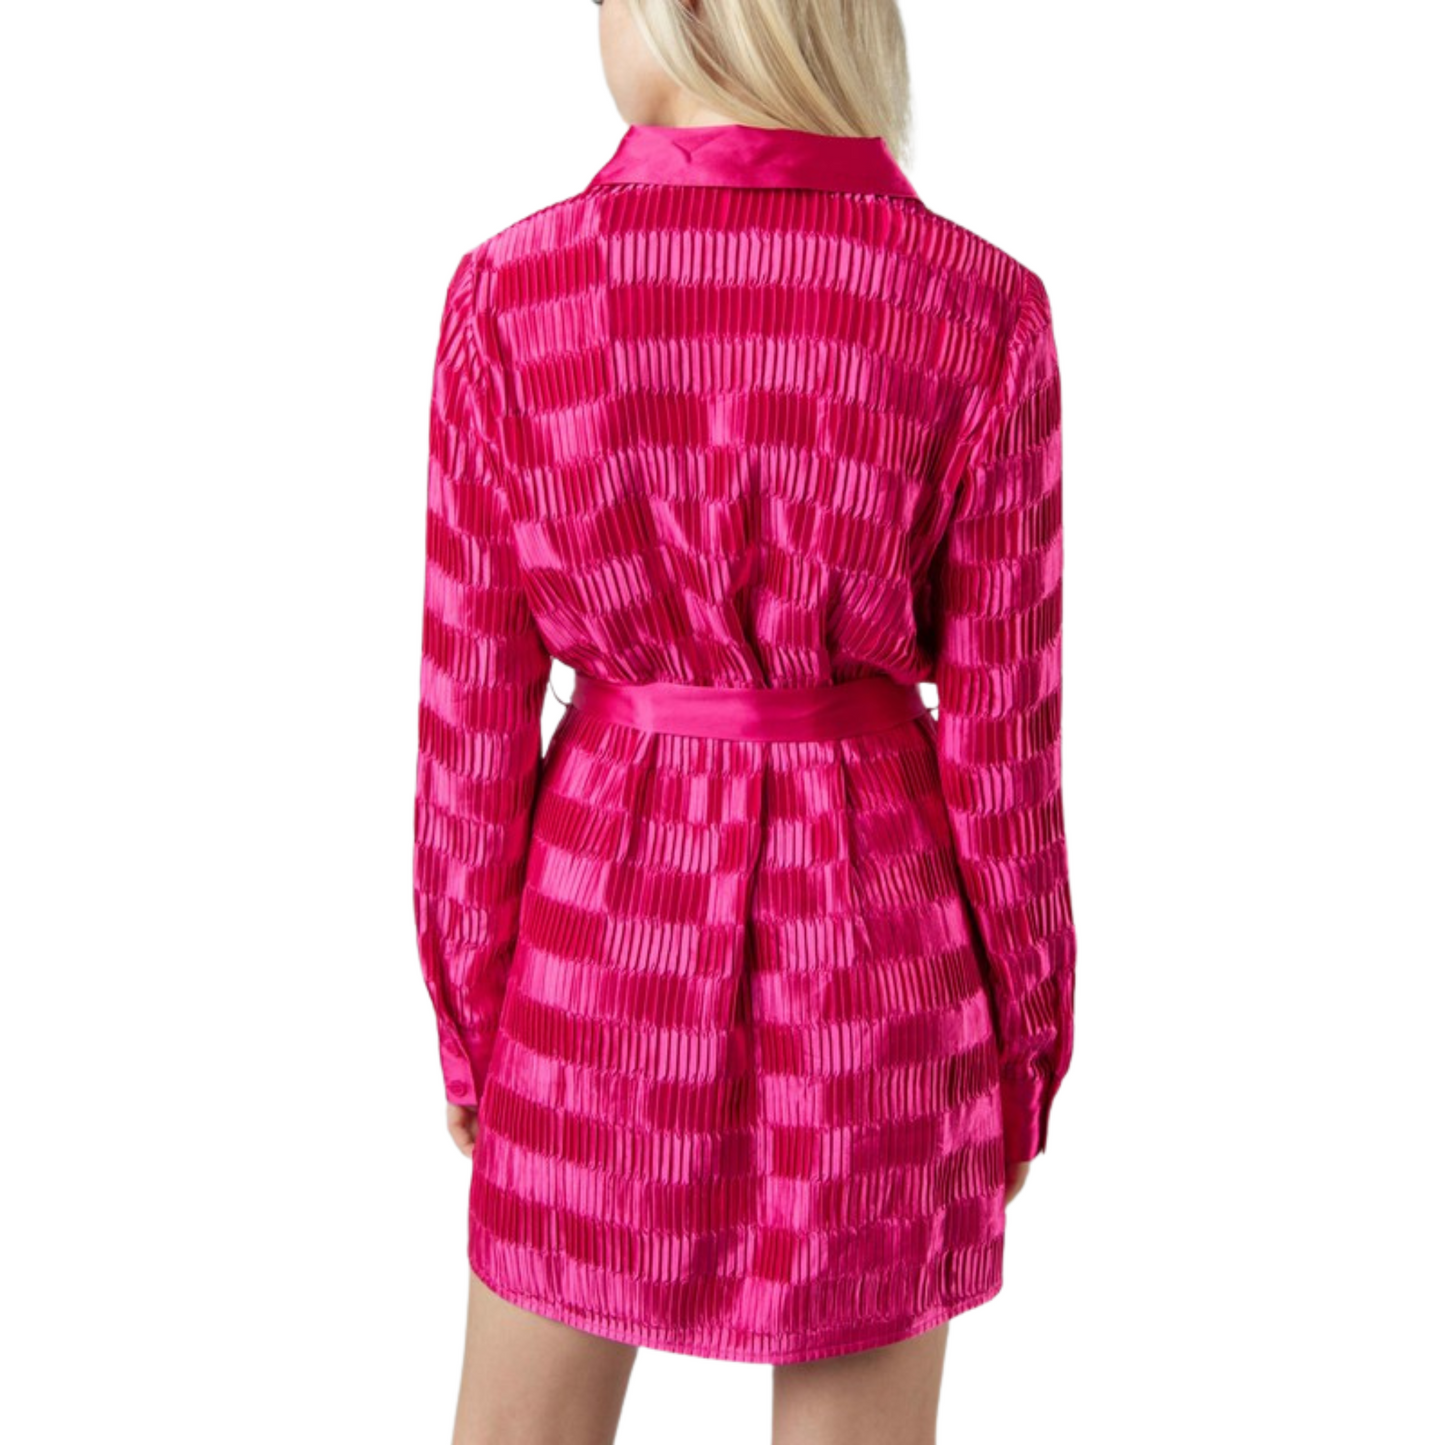 Stay festive this season in this elegant pleated shirt dress. Crafted from shiny satin, this mini dress has a button-down front, long-sleeves, and a waist tie belt for a flattering fit. Perfect for date night or holiday parties, this dress comes in hot pink and other bright colors that will turn heads.